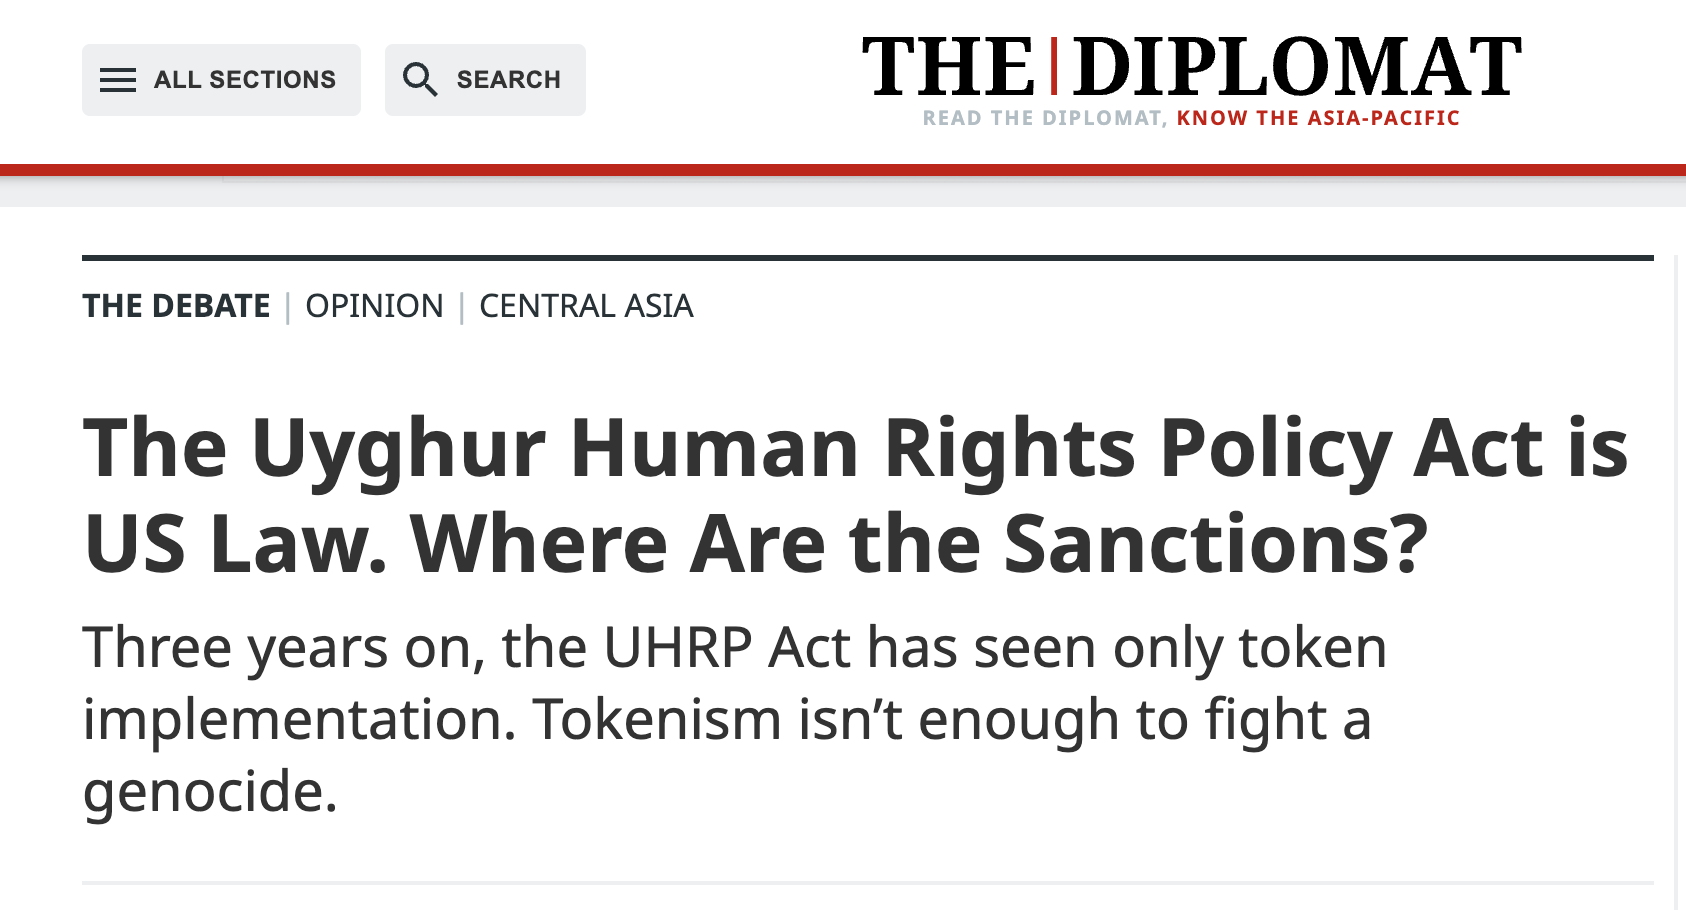 he Uyghur Human Rights Policy Act is US Law. Where Are the Sanctions?